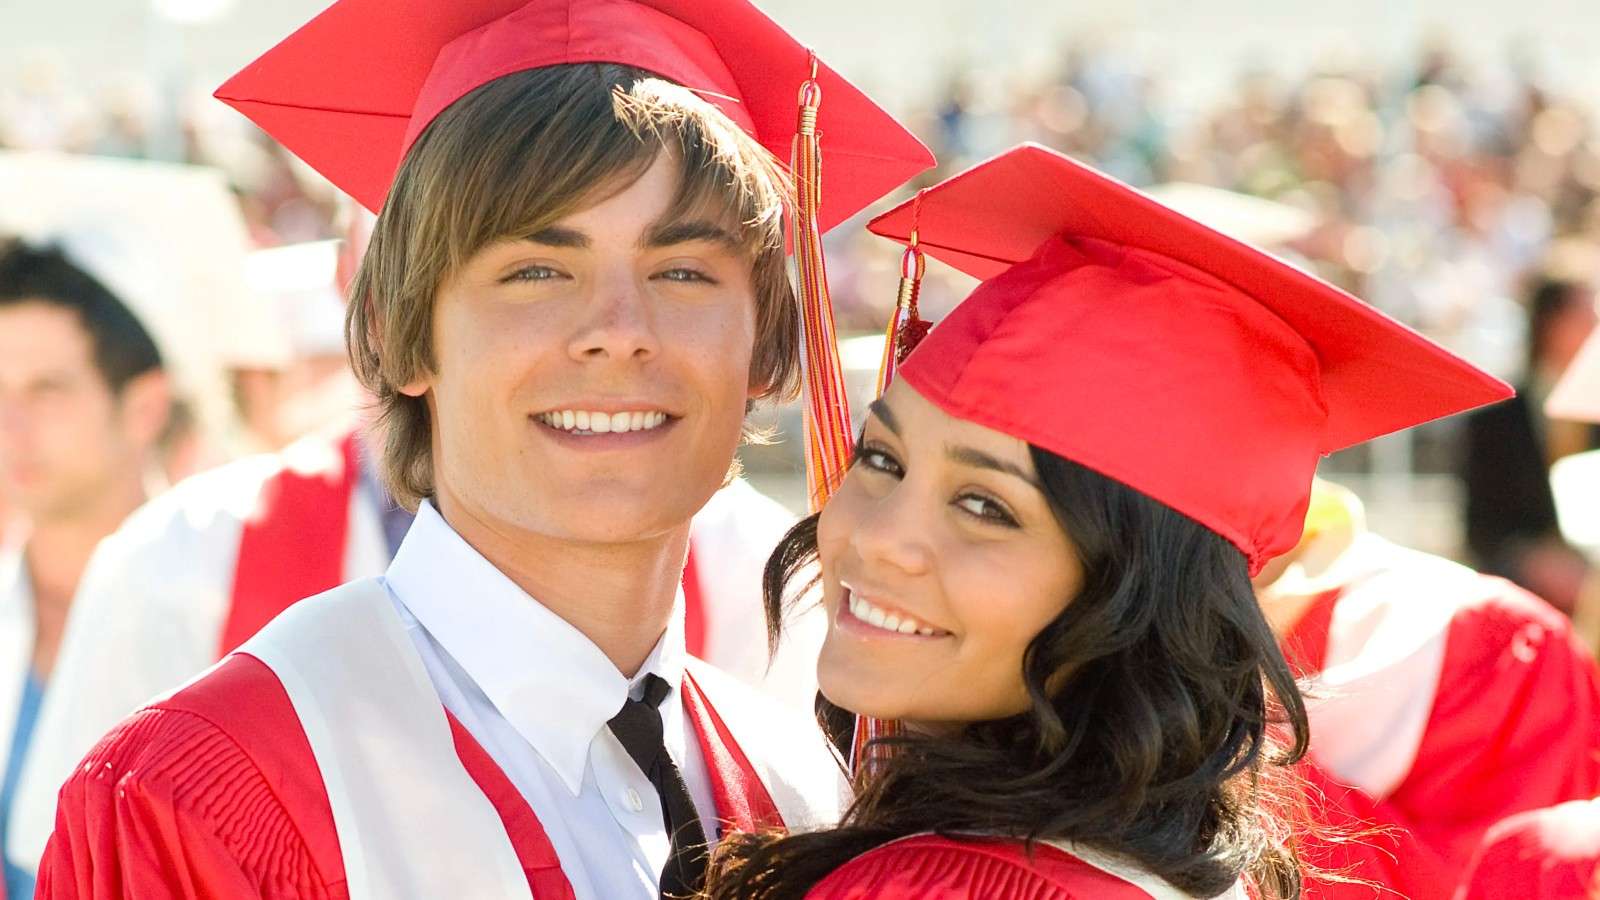 Zac Efron and Vanessa Hudgens as Troy and Gabriella in High School Musical 3